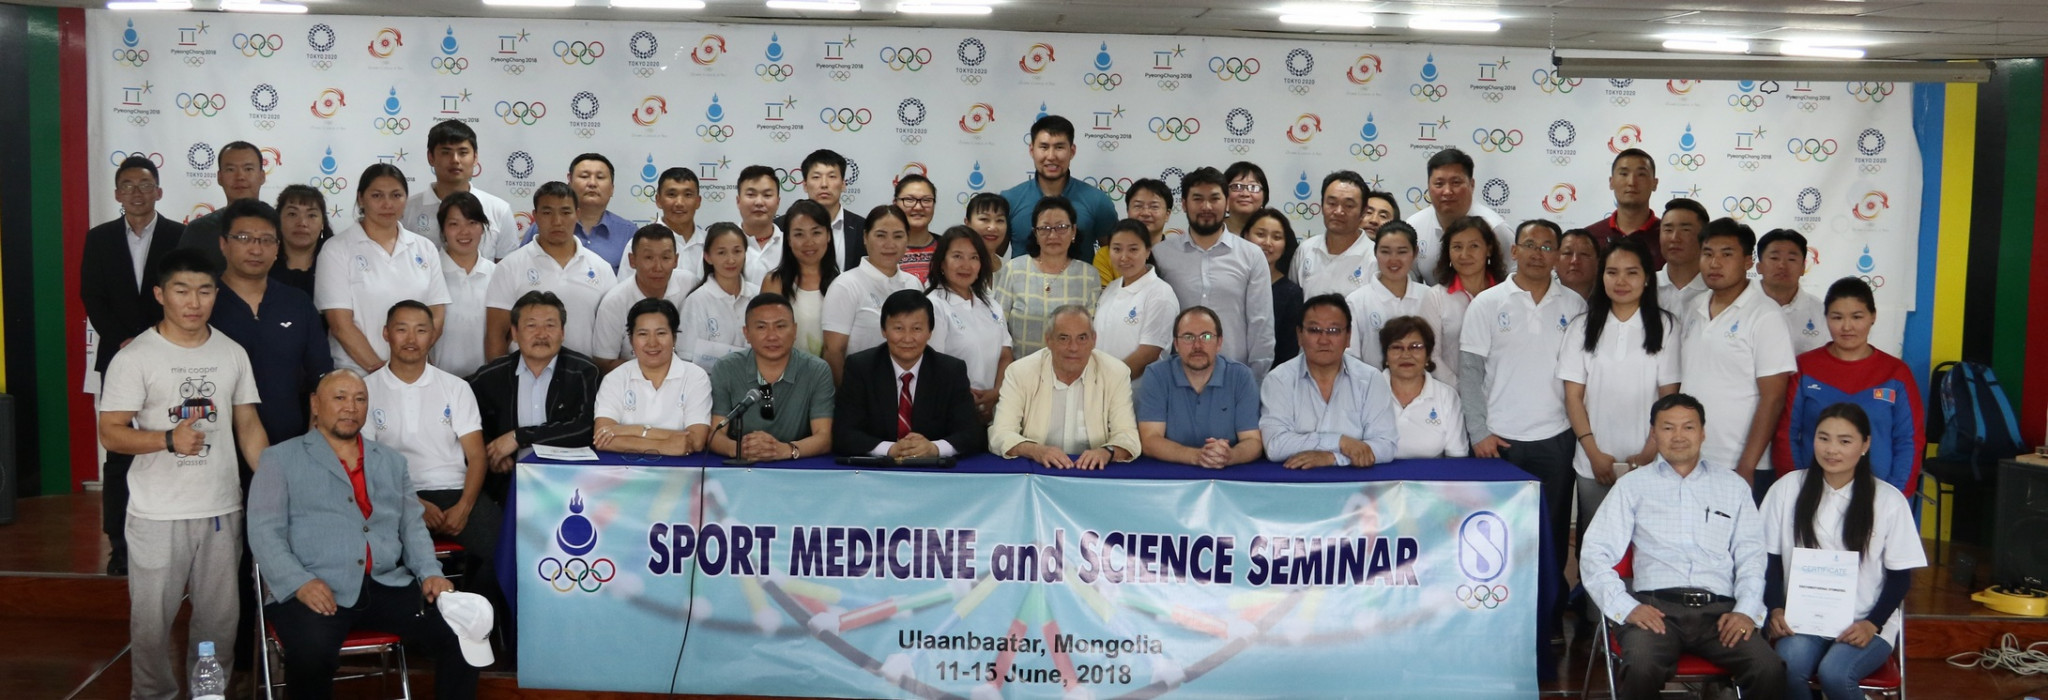 The Mongolian National Olympic Committee has held a seminar in sports medicine and science, with help from the Olympic Solidarity Committee ©MOC